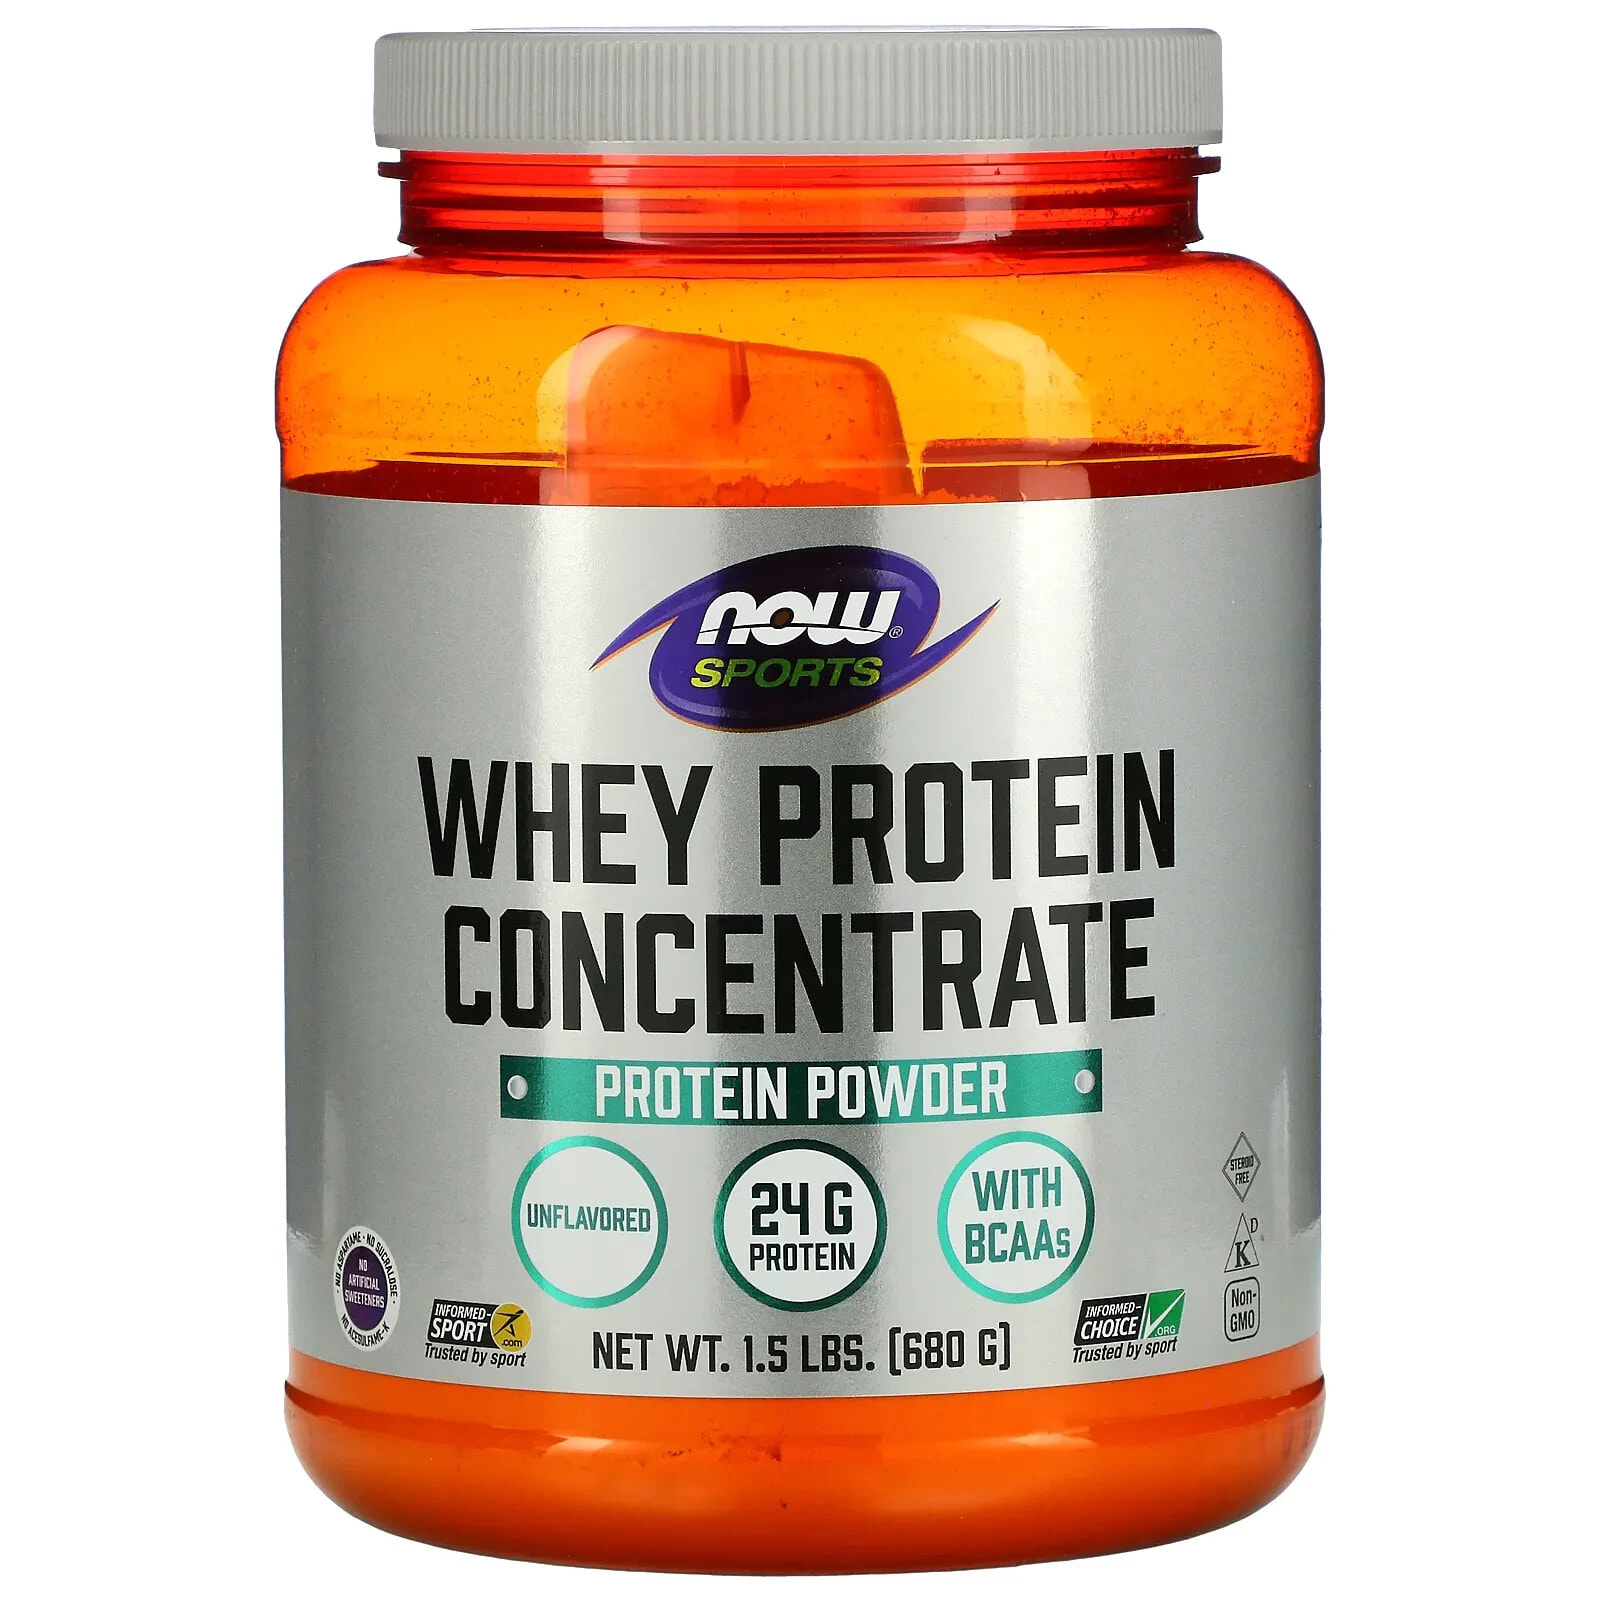 NOW Sports Whey Protein Concentrate Unflavored Концентрат сывороточного протеина 680 г